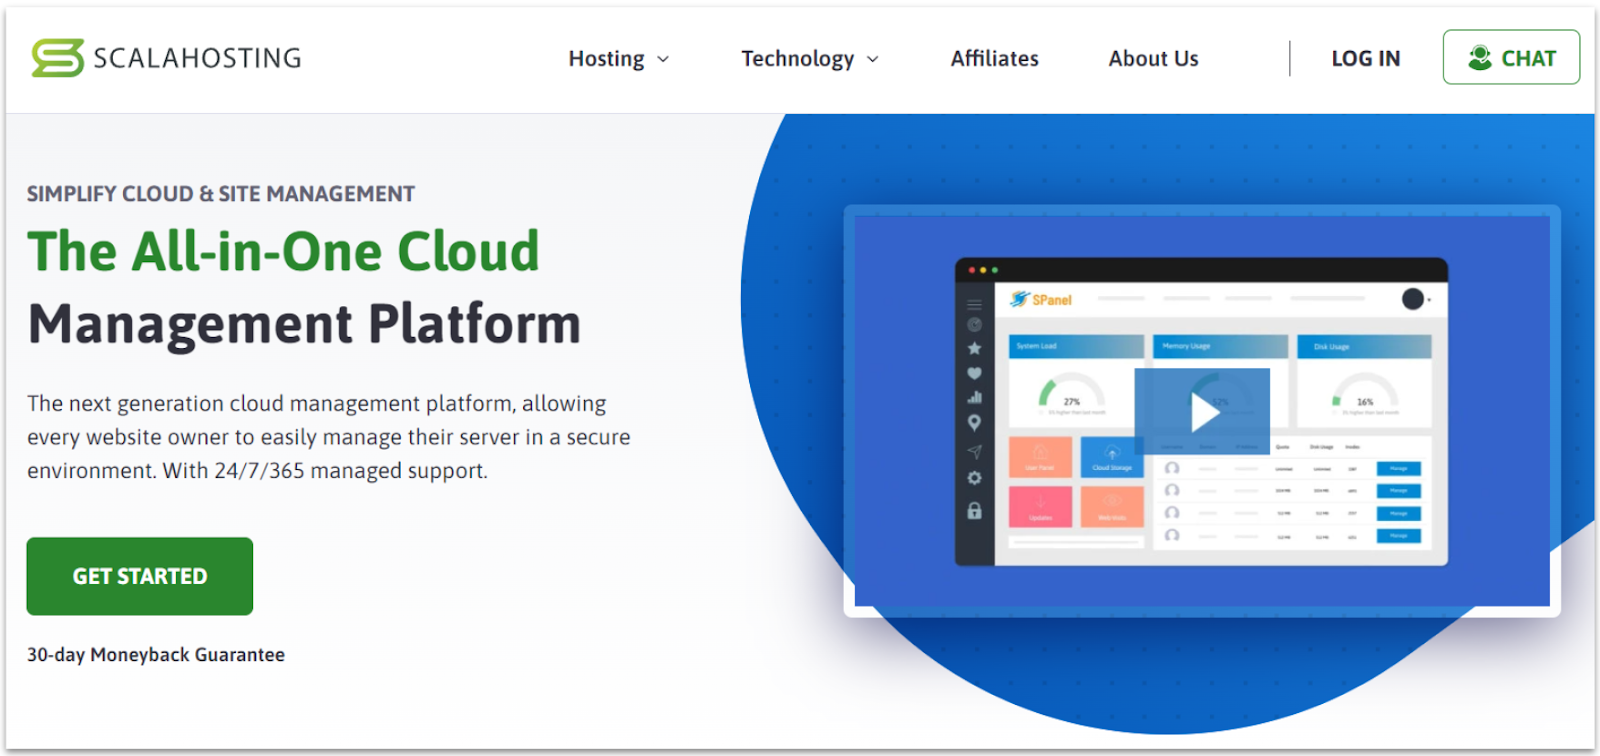 ScalaHosting offers its proprietary SPanel control panel for all cloud plans, including unmanaged VPS